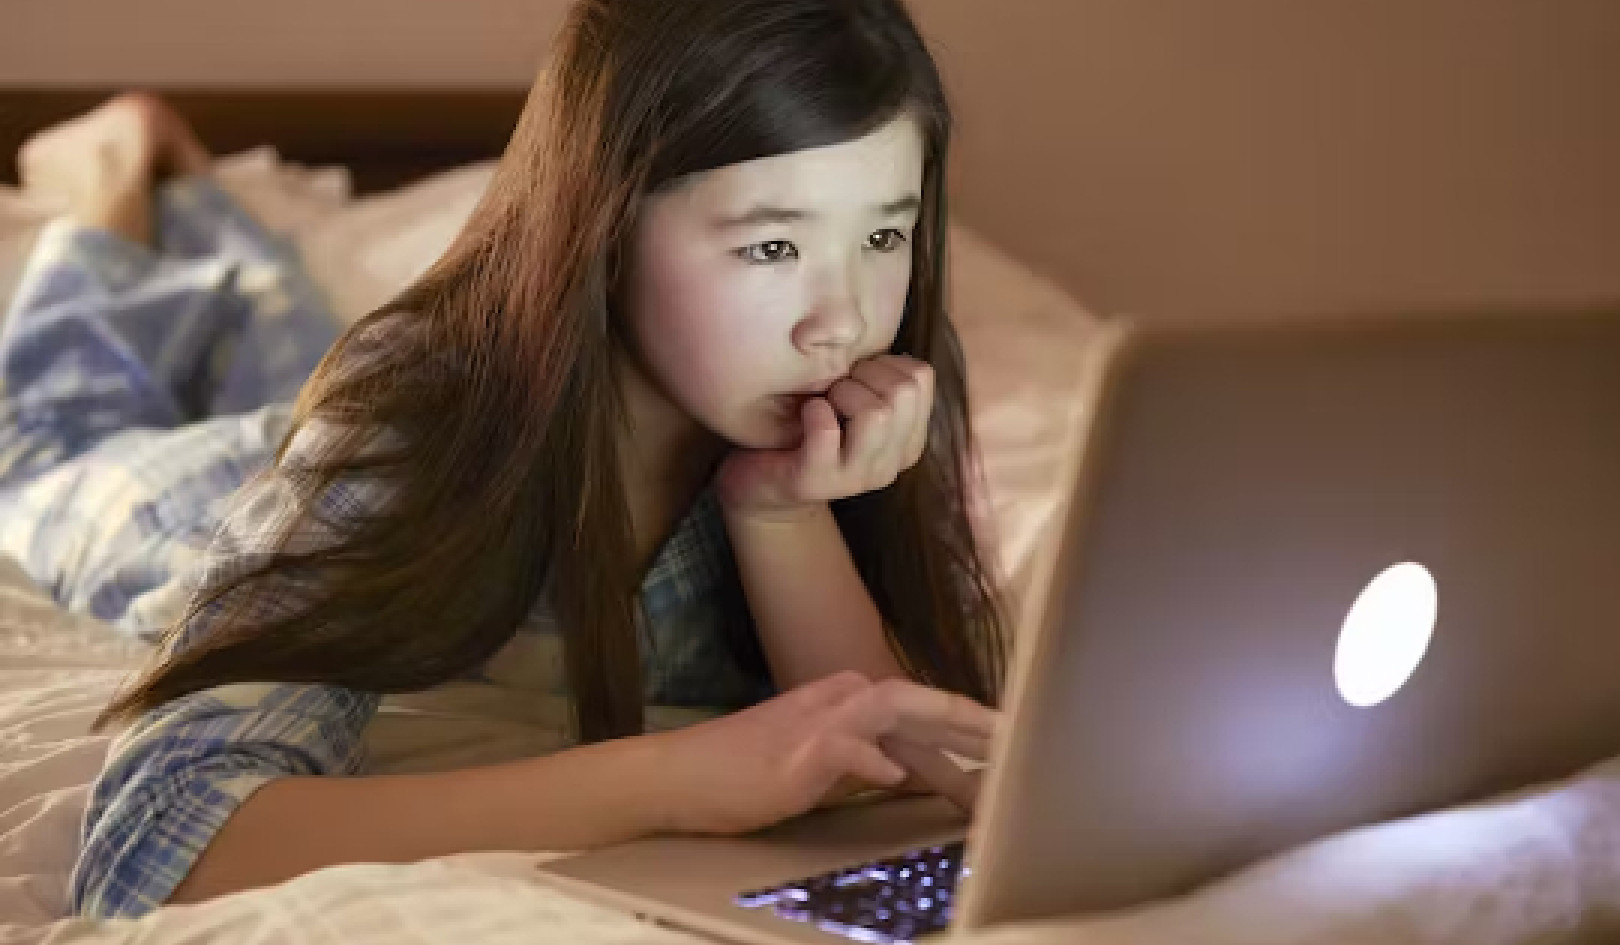 Children’s Webcams Are Being Targeted by Online Predators